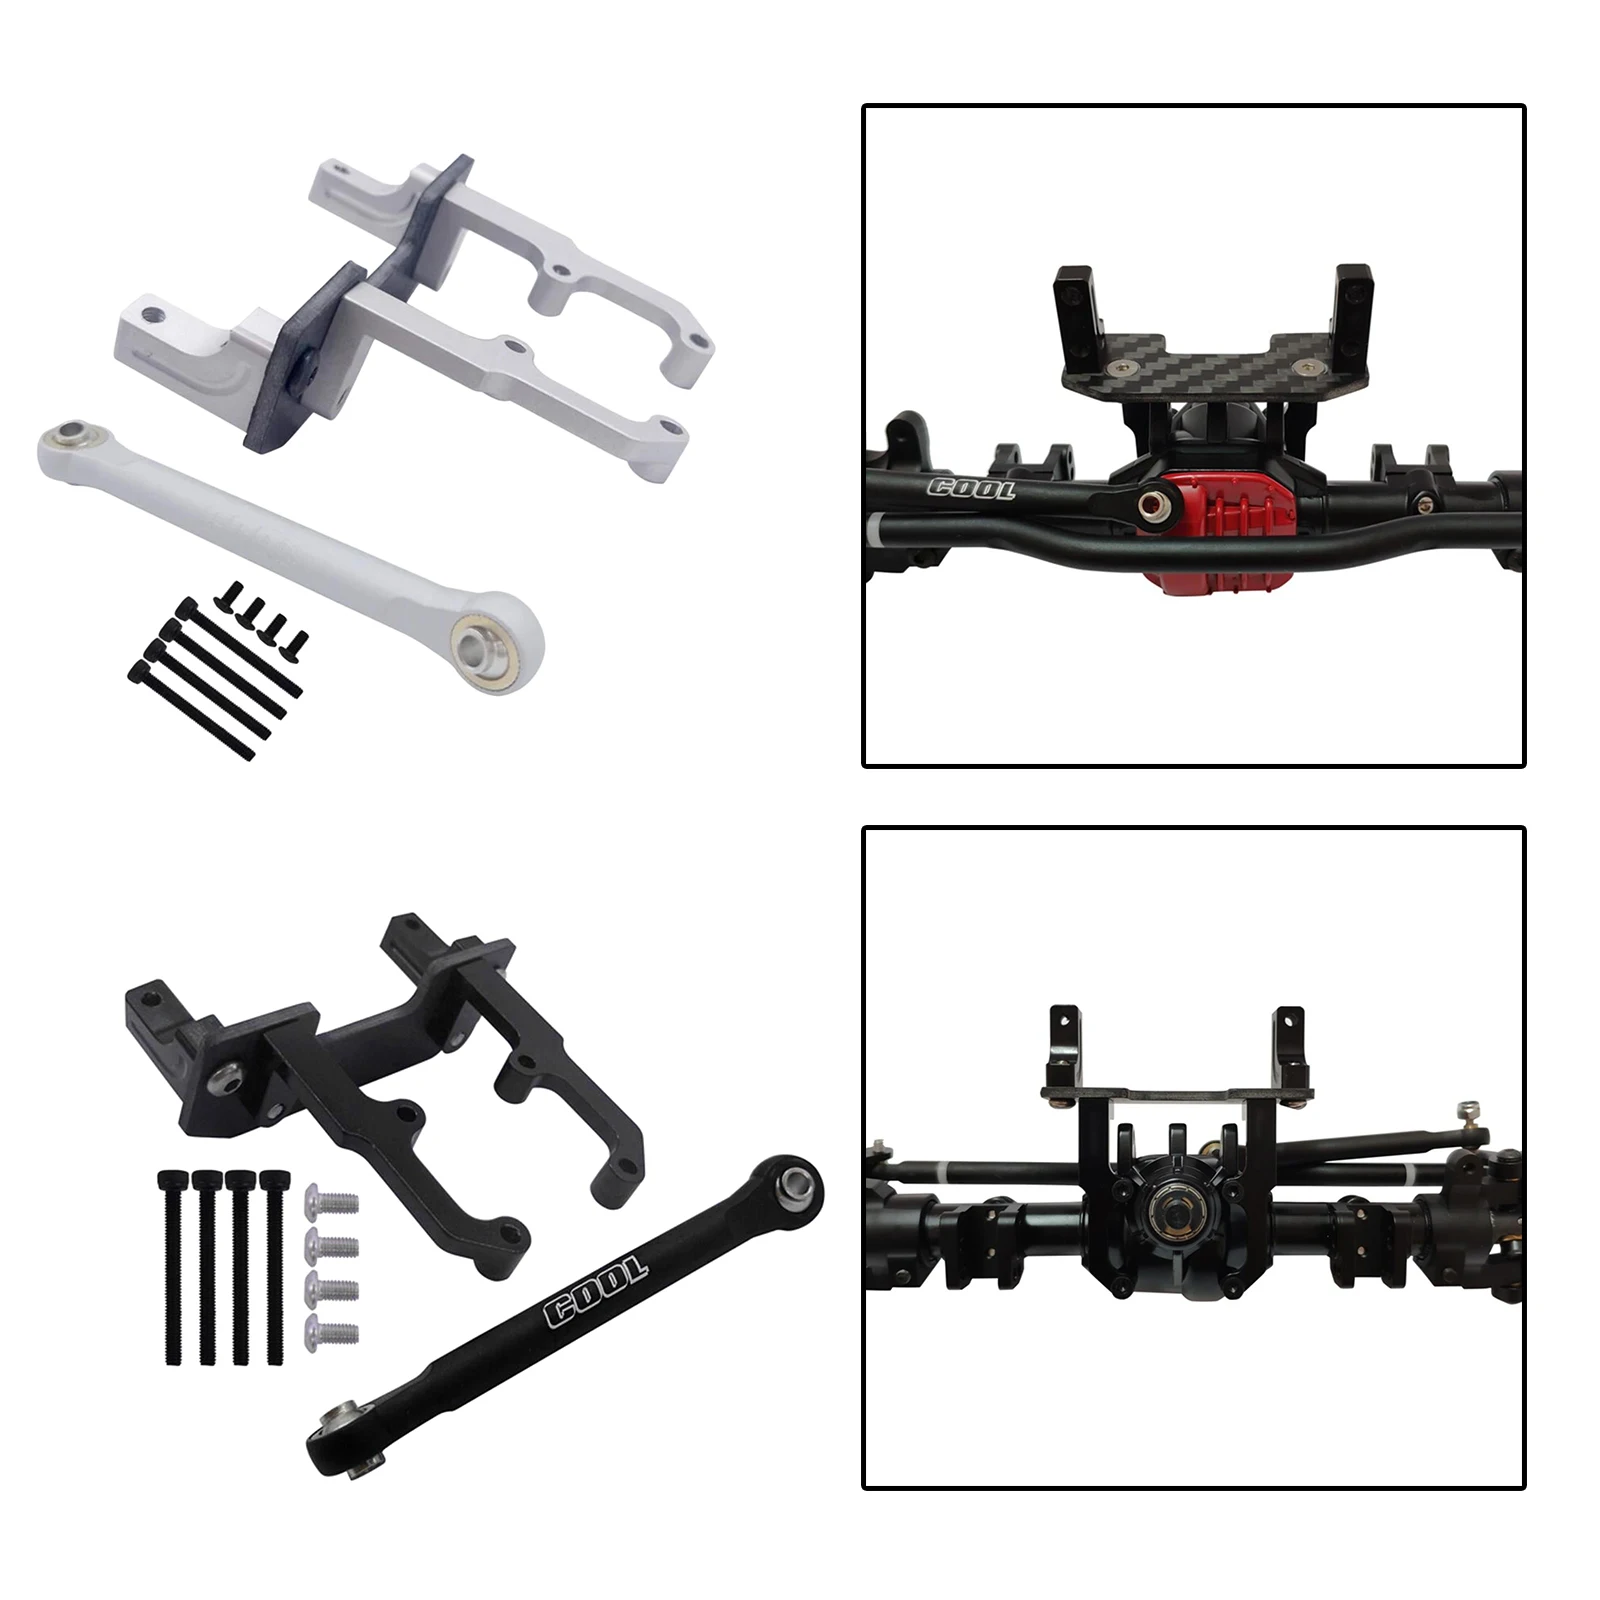 Metal Carbon Fiber Bottom Plate Servo Bracket Mount Stand For 1/10 RC Crawler Car for Axial SCX10 II 90046 90047 Axle Ar44 Part